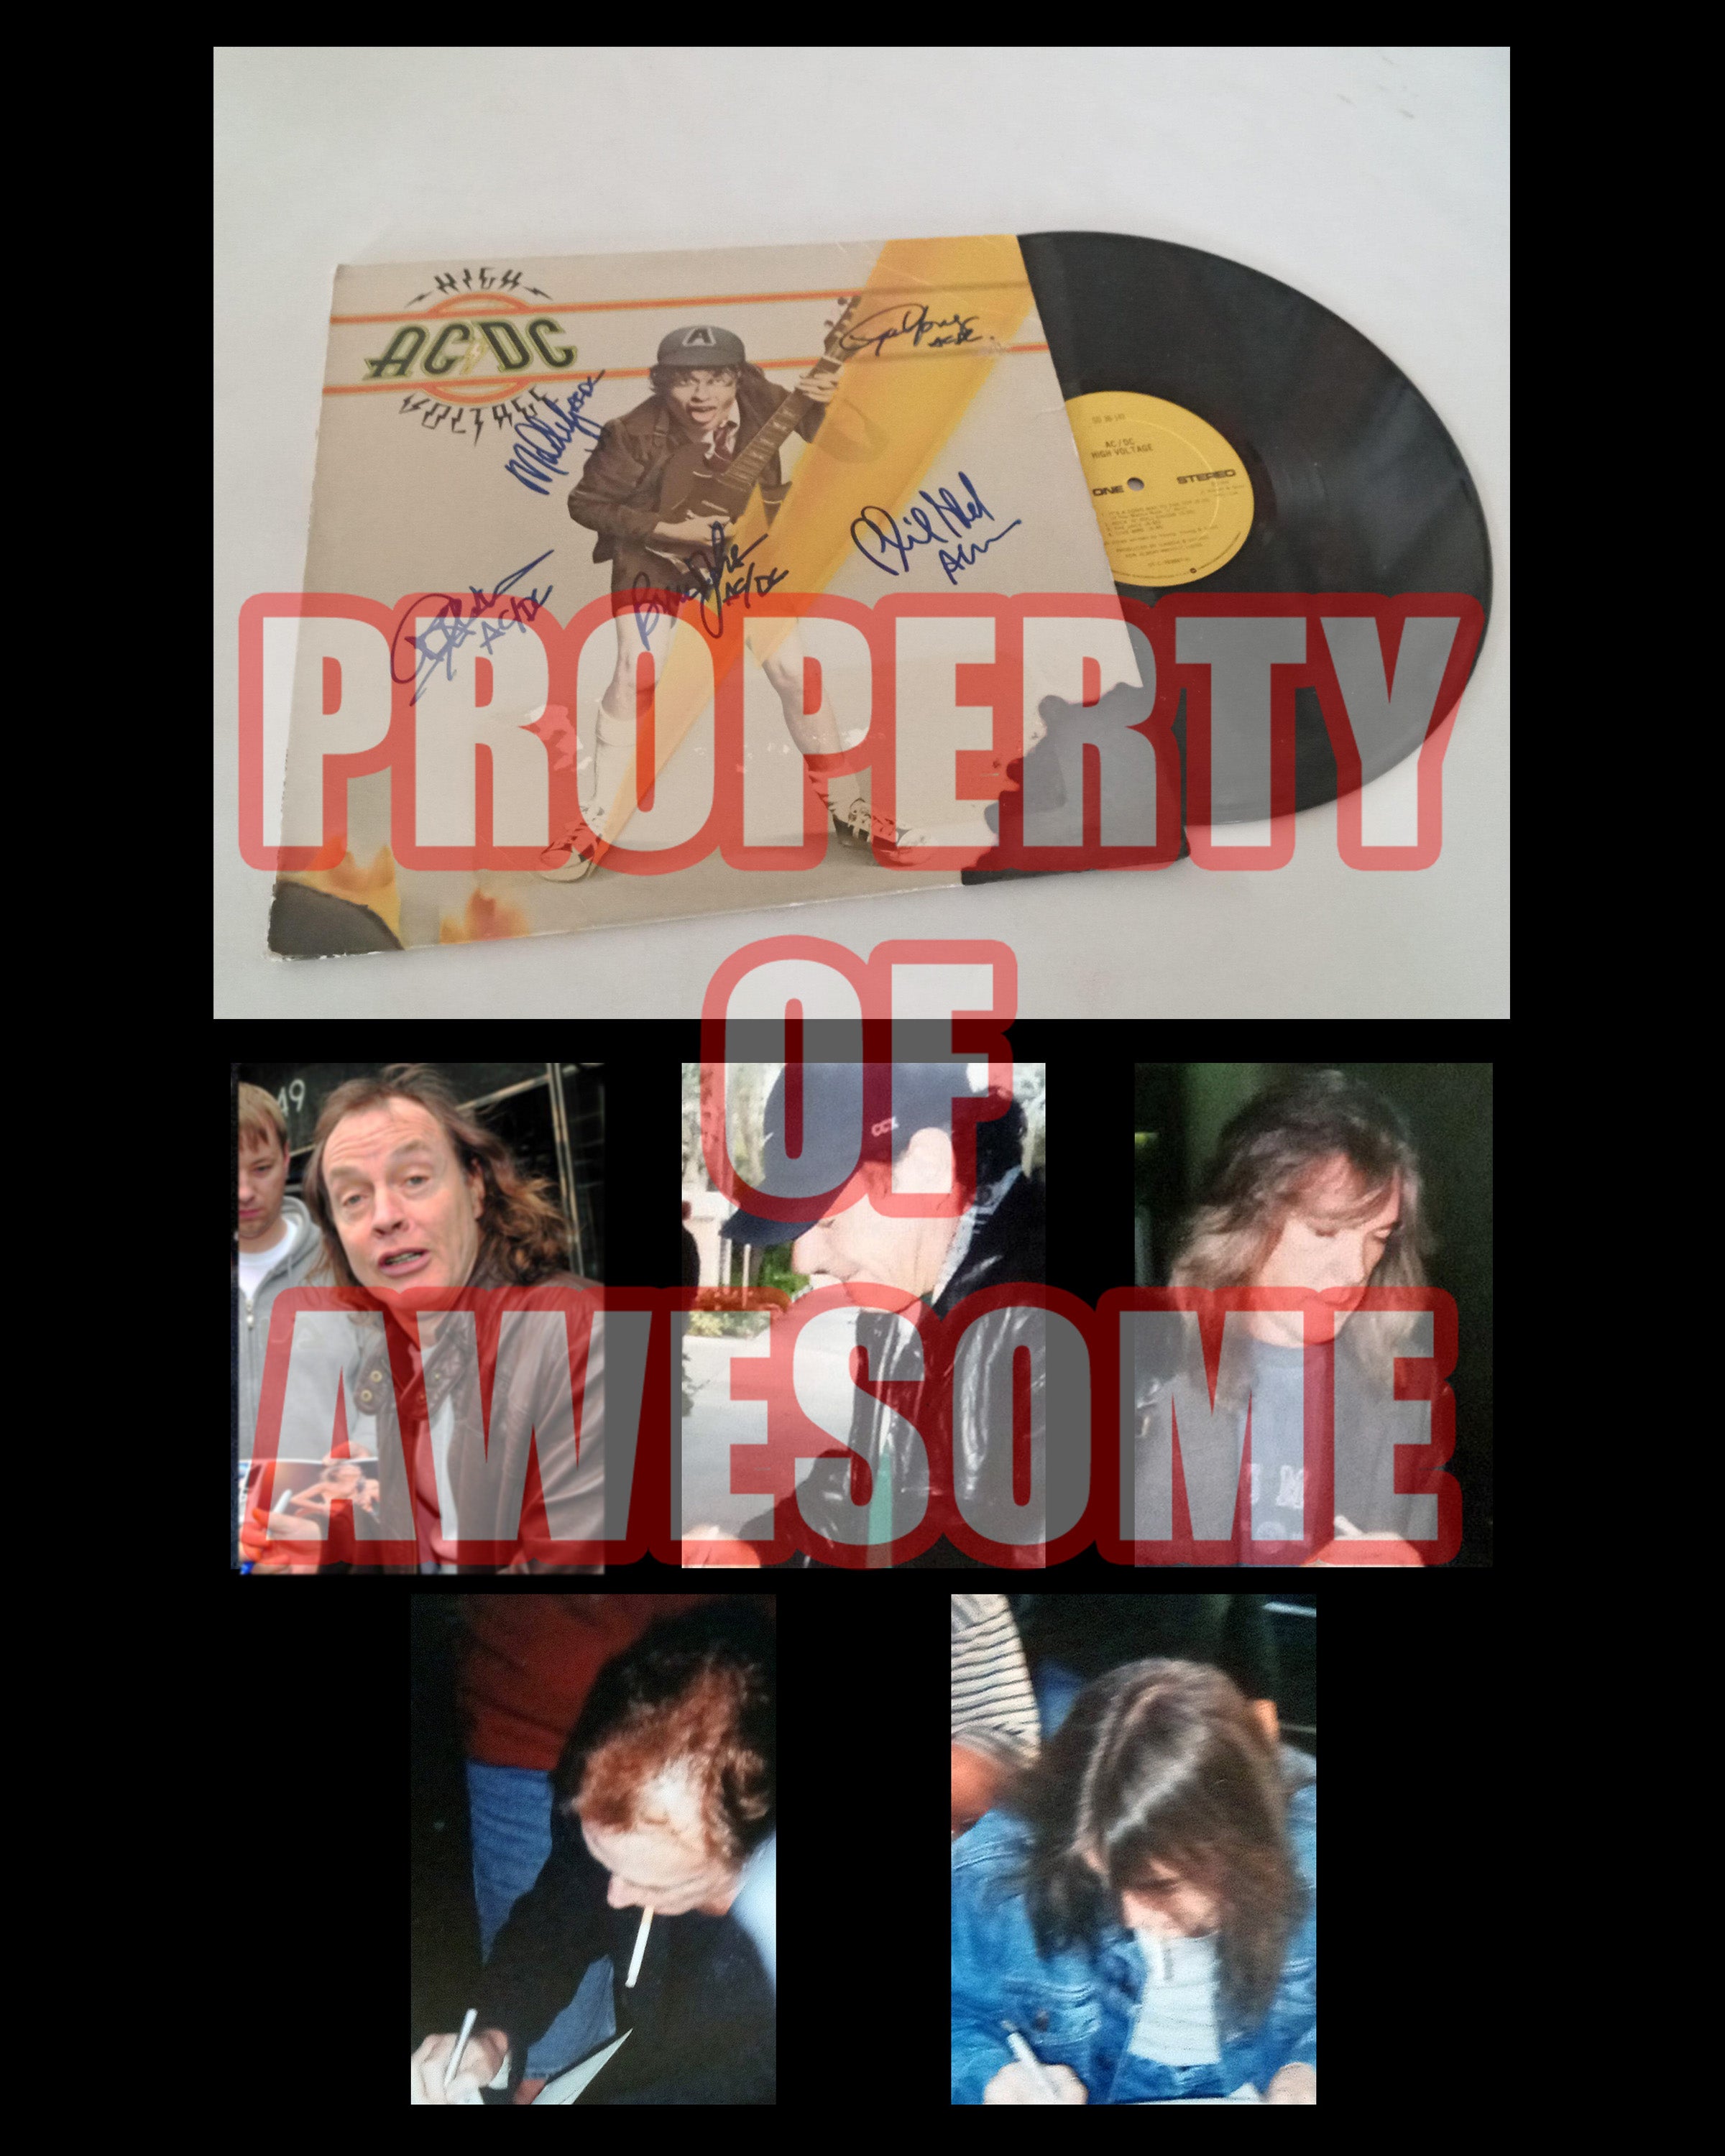 Angus Young, Malcolm Young, Brian Johnson, Phil Rudd, Cliff Williams, AC/DC LP signed with proof